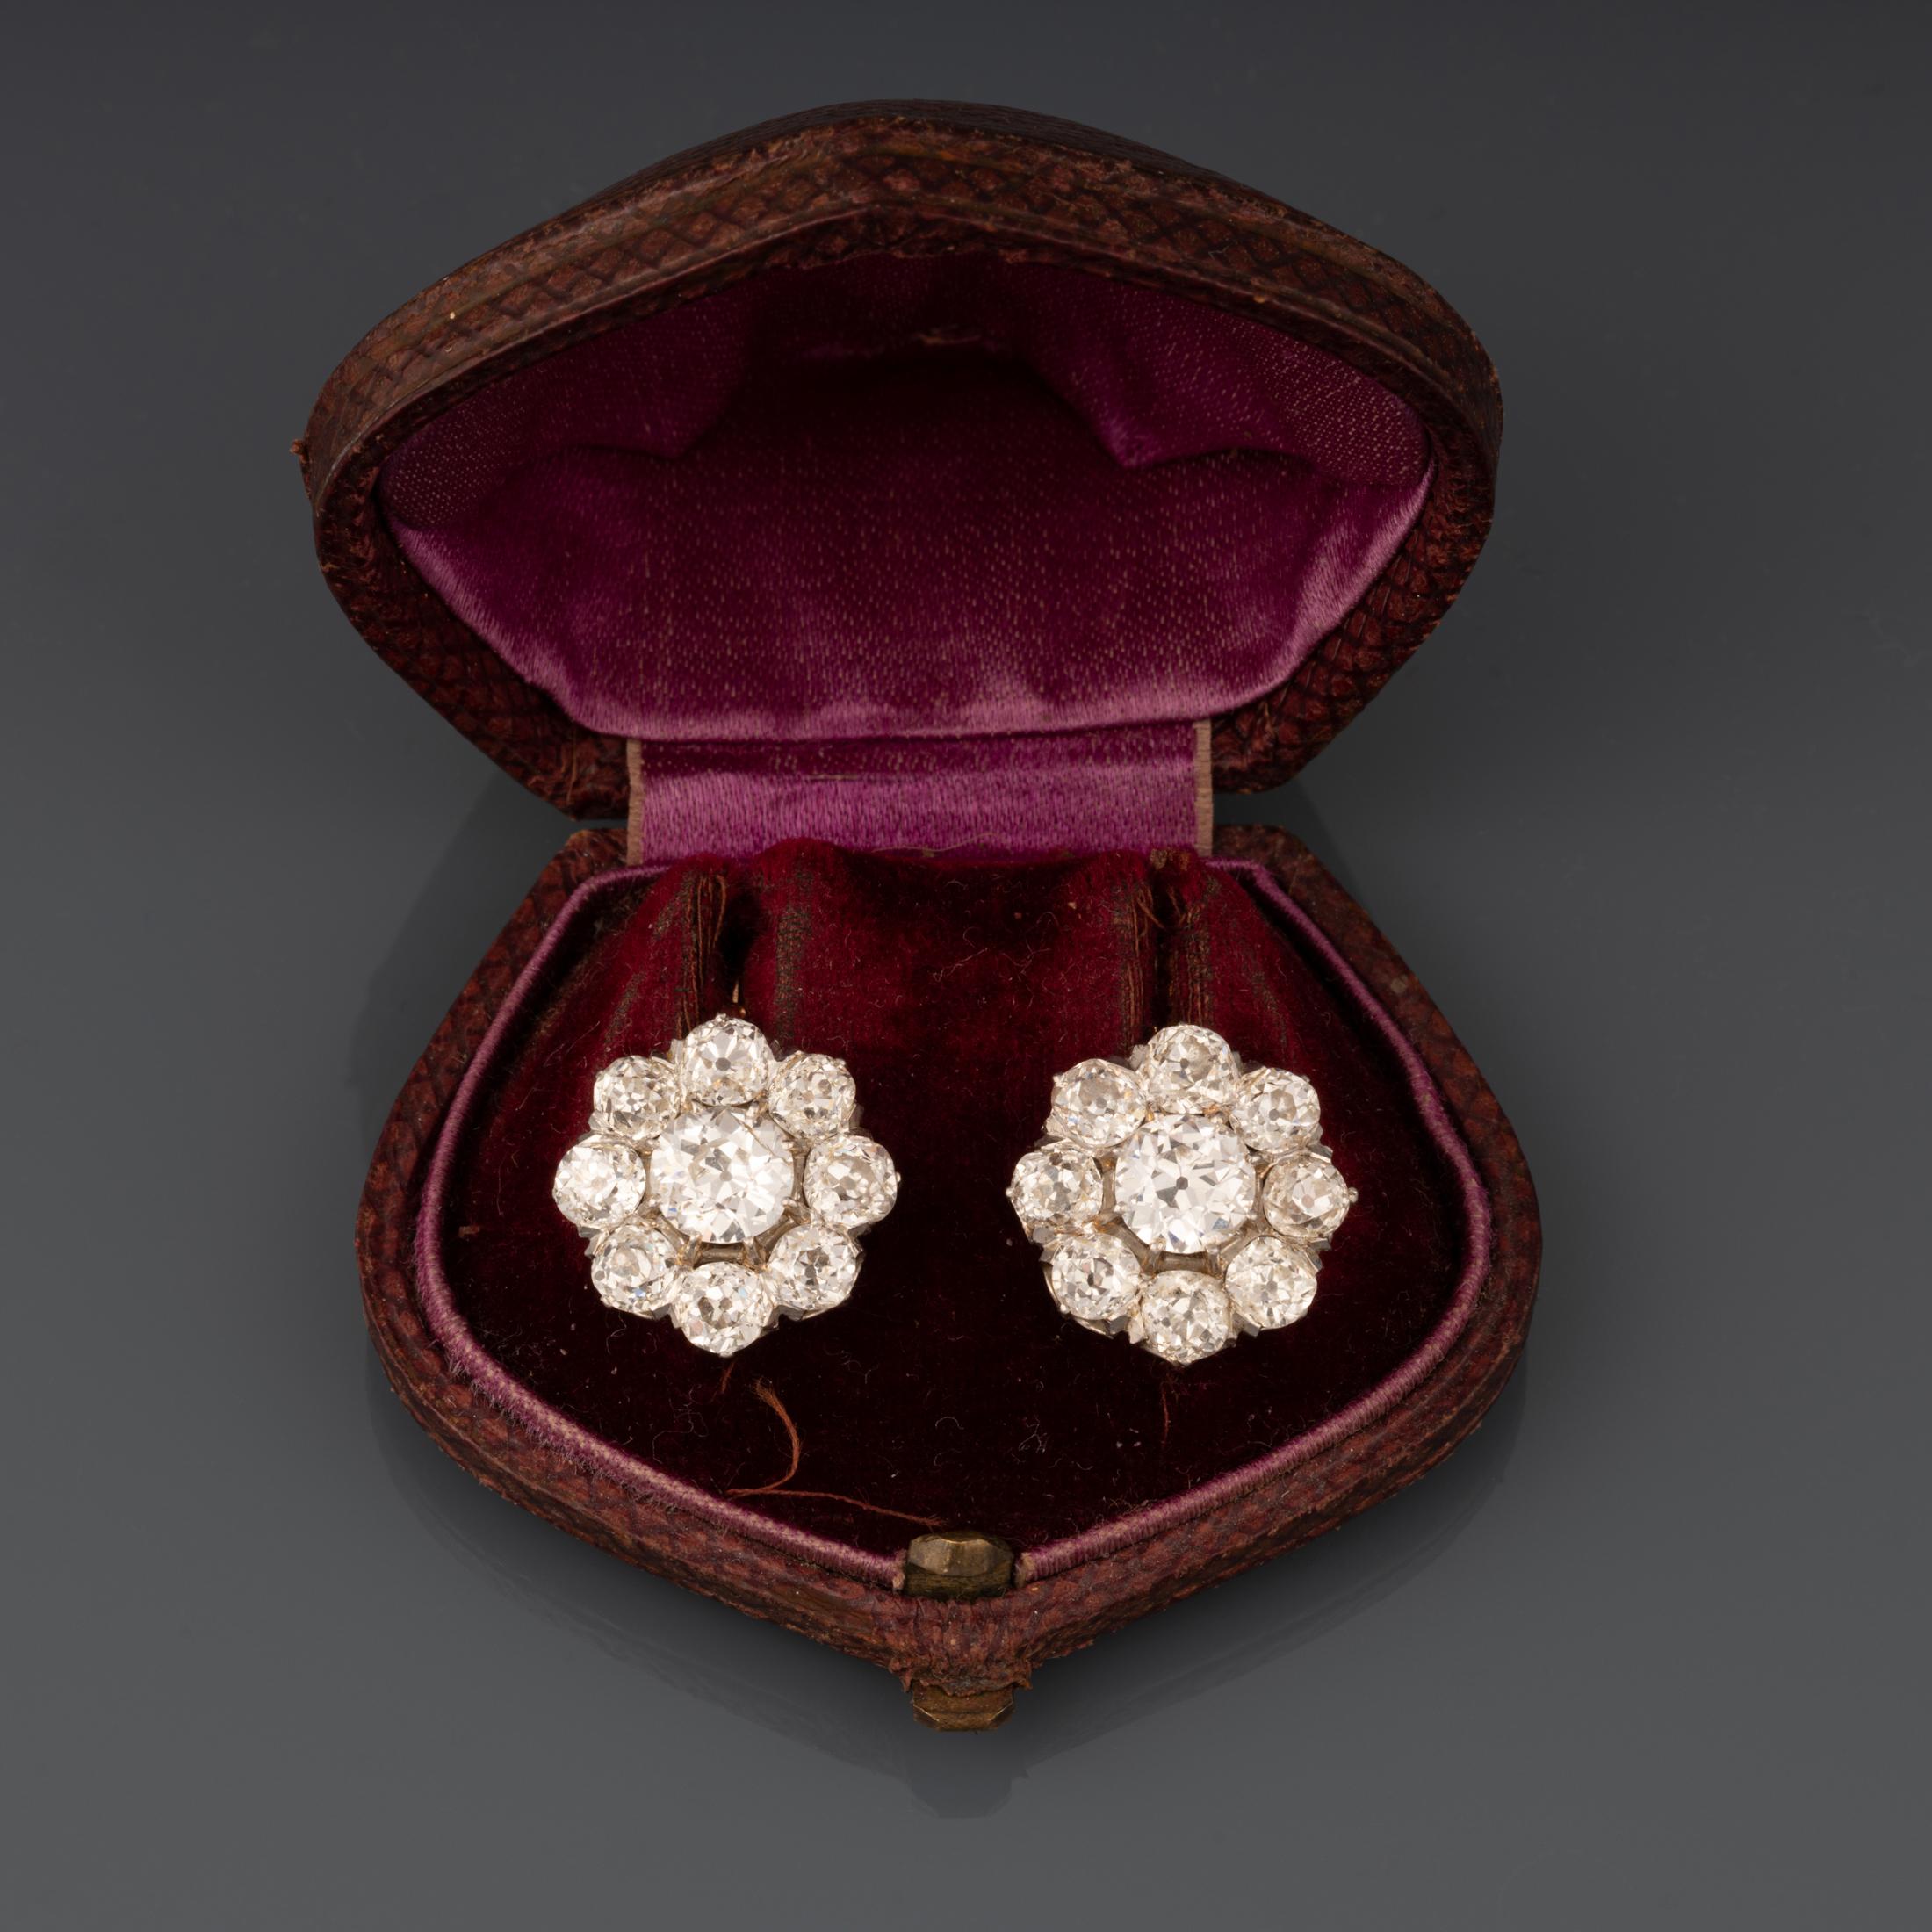 A very lovely pair of antique diamonds Earrings, they have stayed in the same family since the 1860s.

The diamonds are quality, the weight of diamonds is 2.60 Carats per earrings approximately, the bigger one are 0.75 plus 1.80 arround.

The